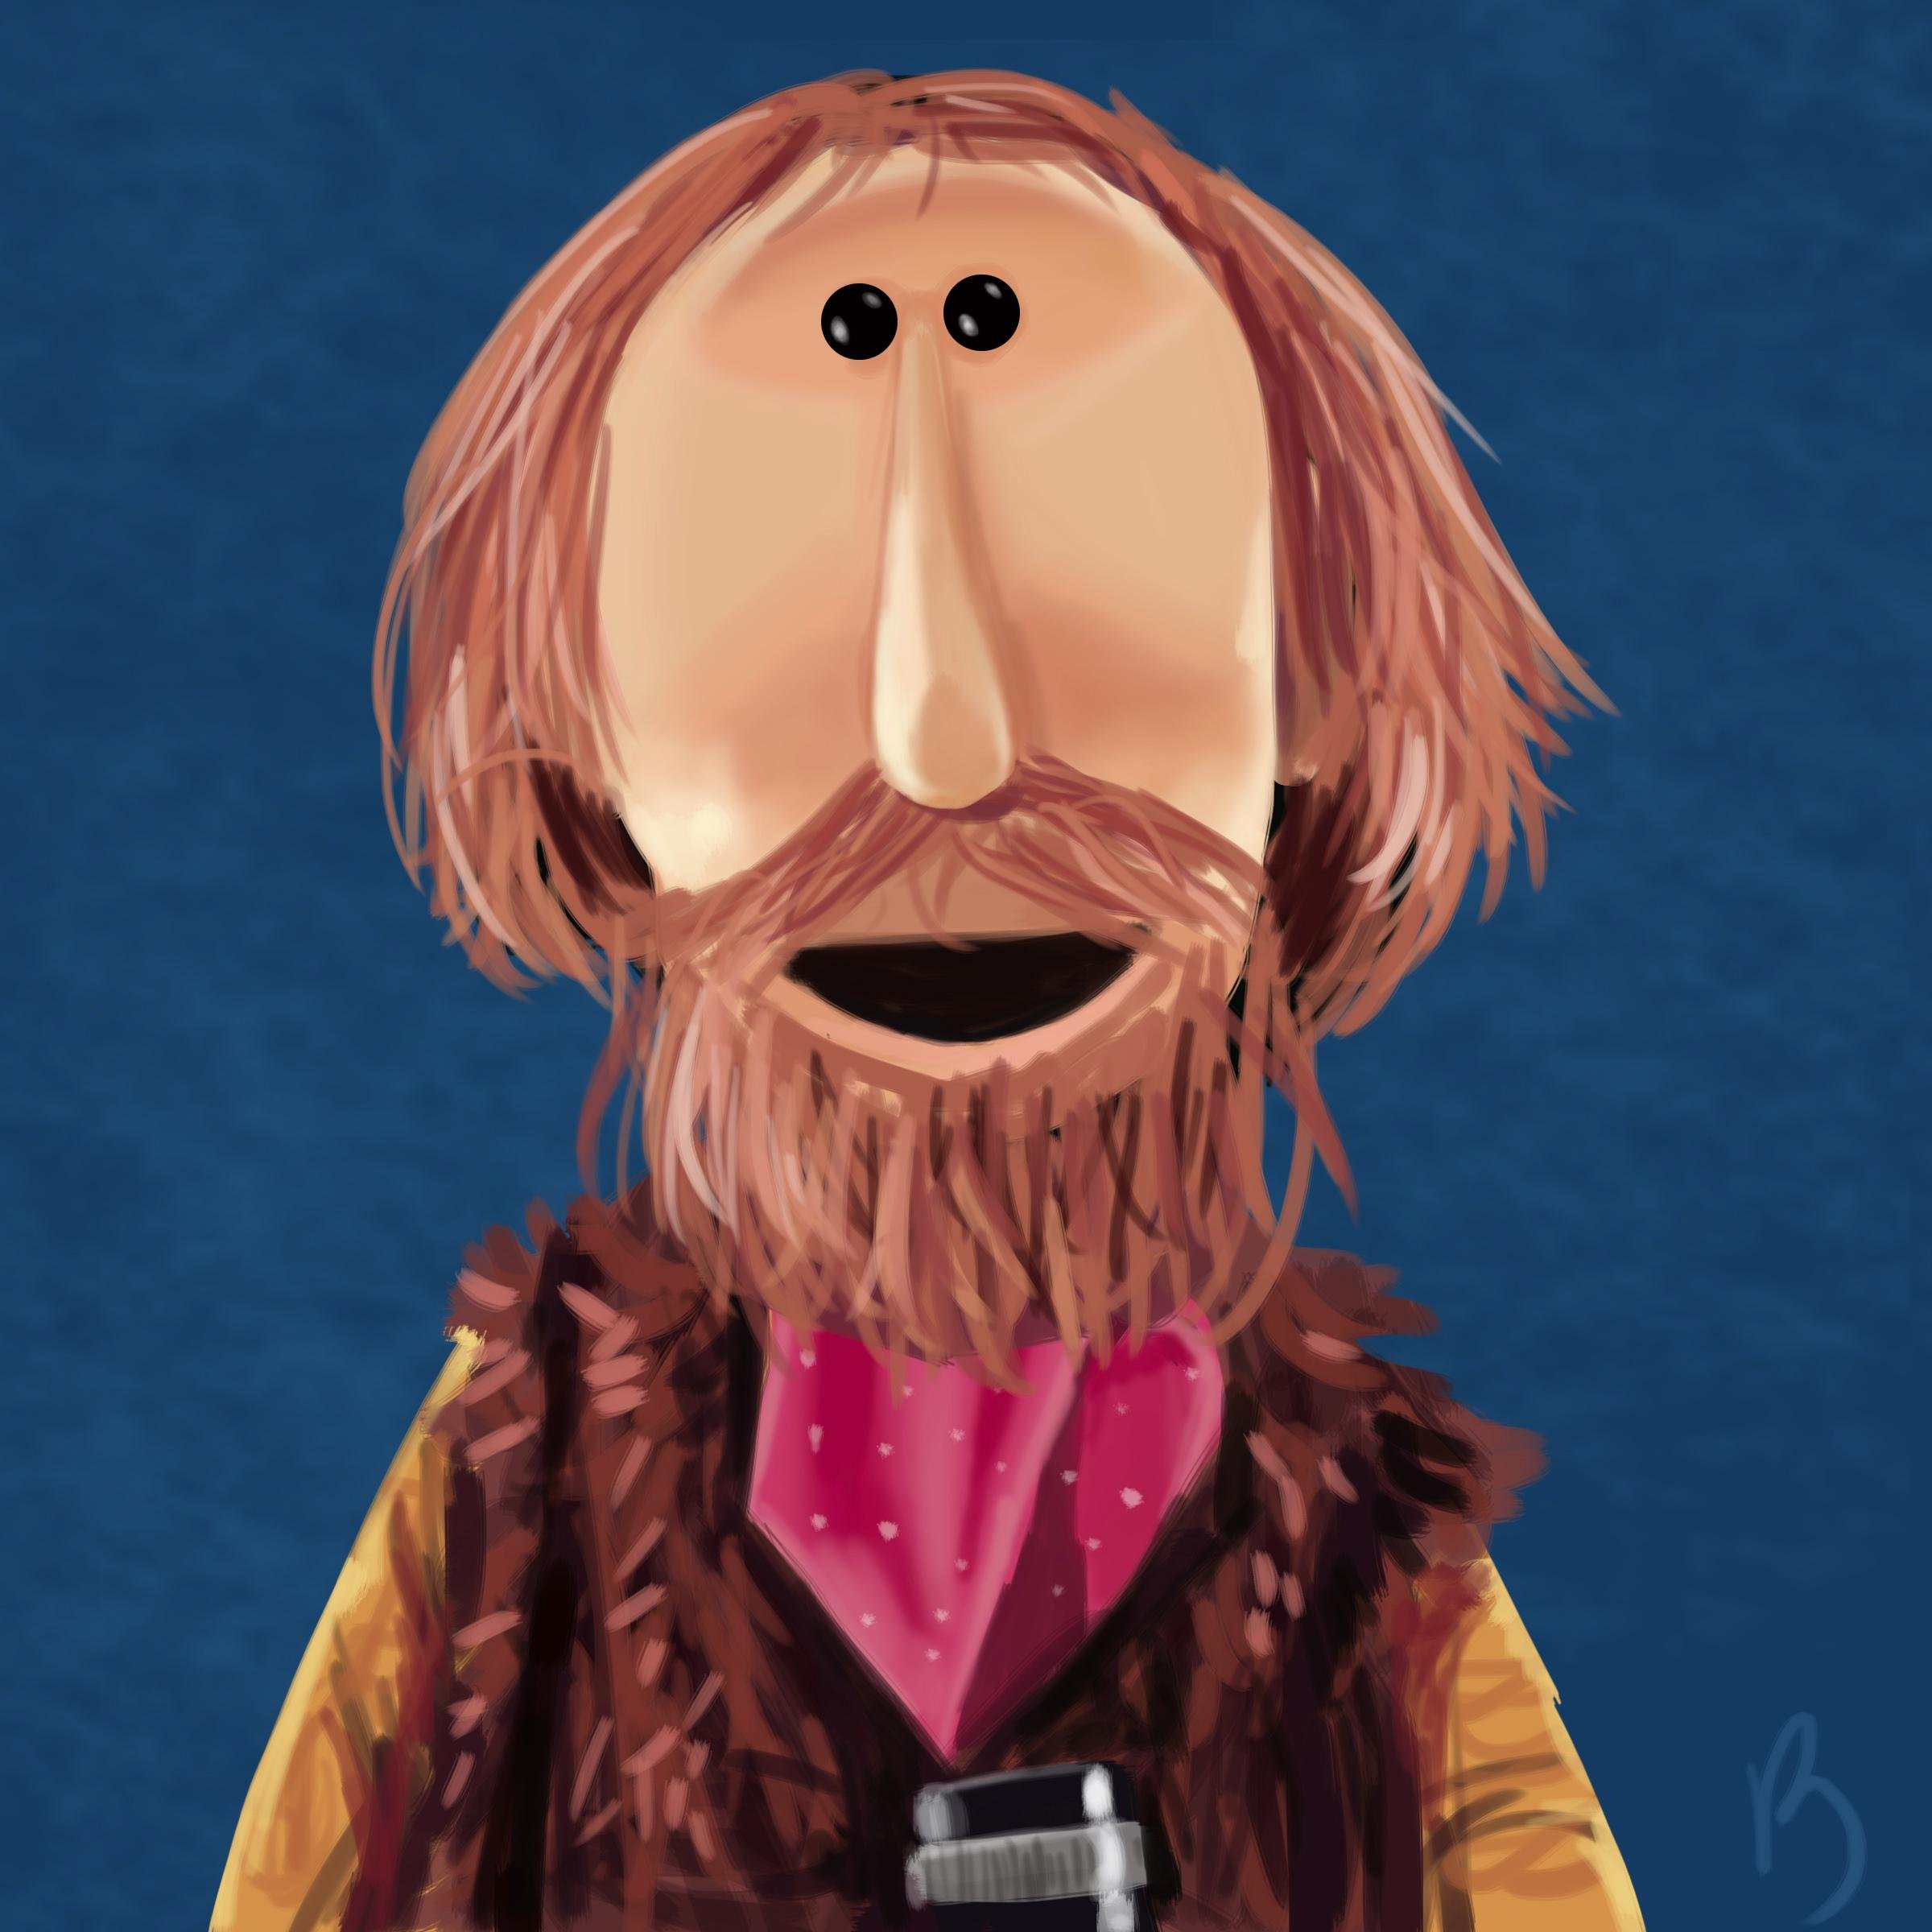 With the help of Muppet Wiki’s random Muppet generator, I will draw a randomly selected Muppet a day, from now until December 31, 2014. That’s 365 Muppets.